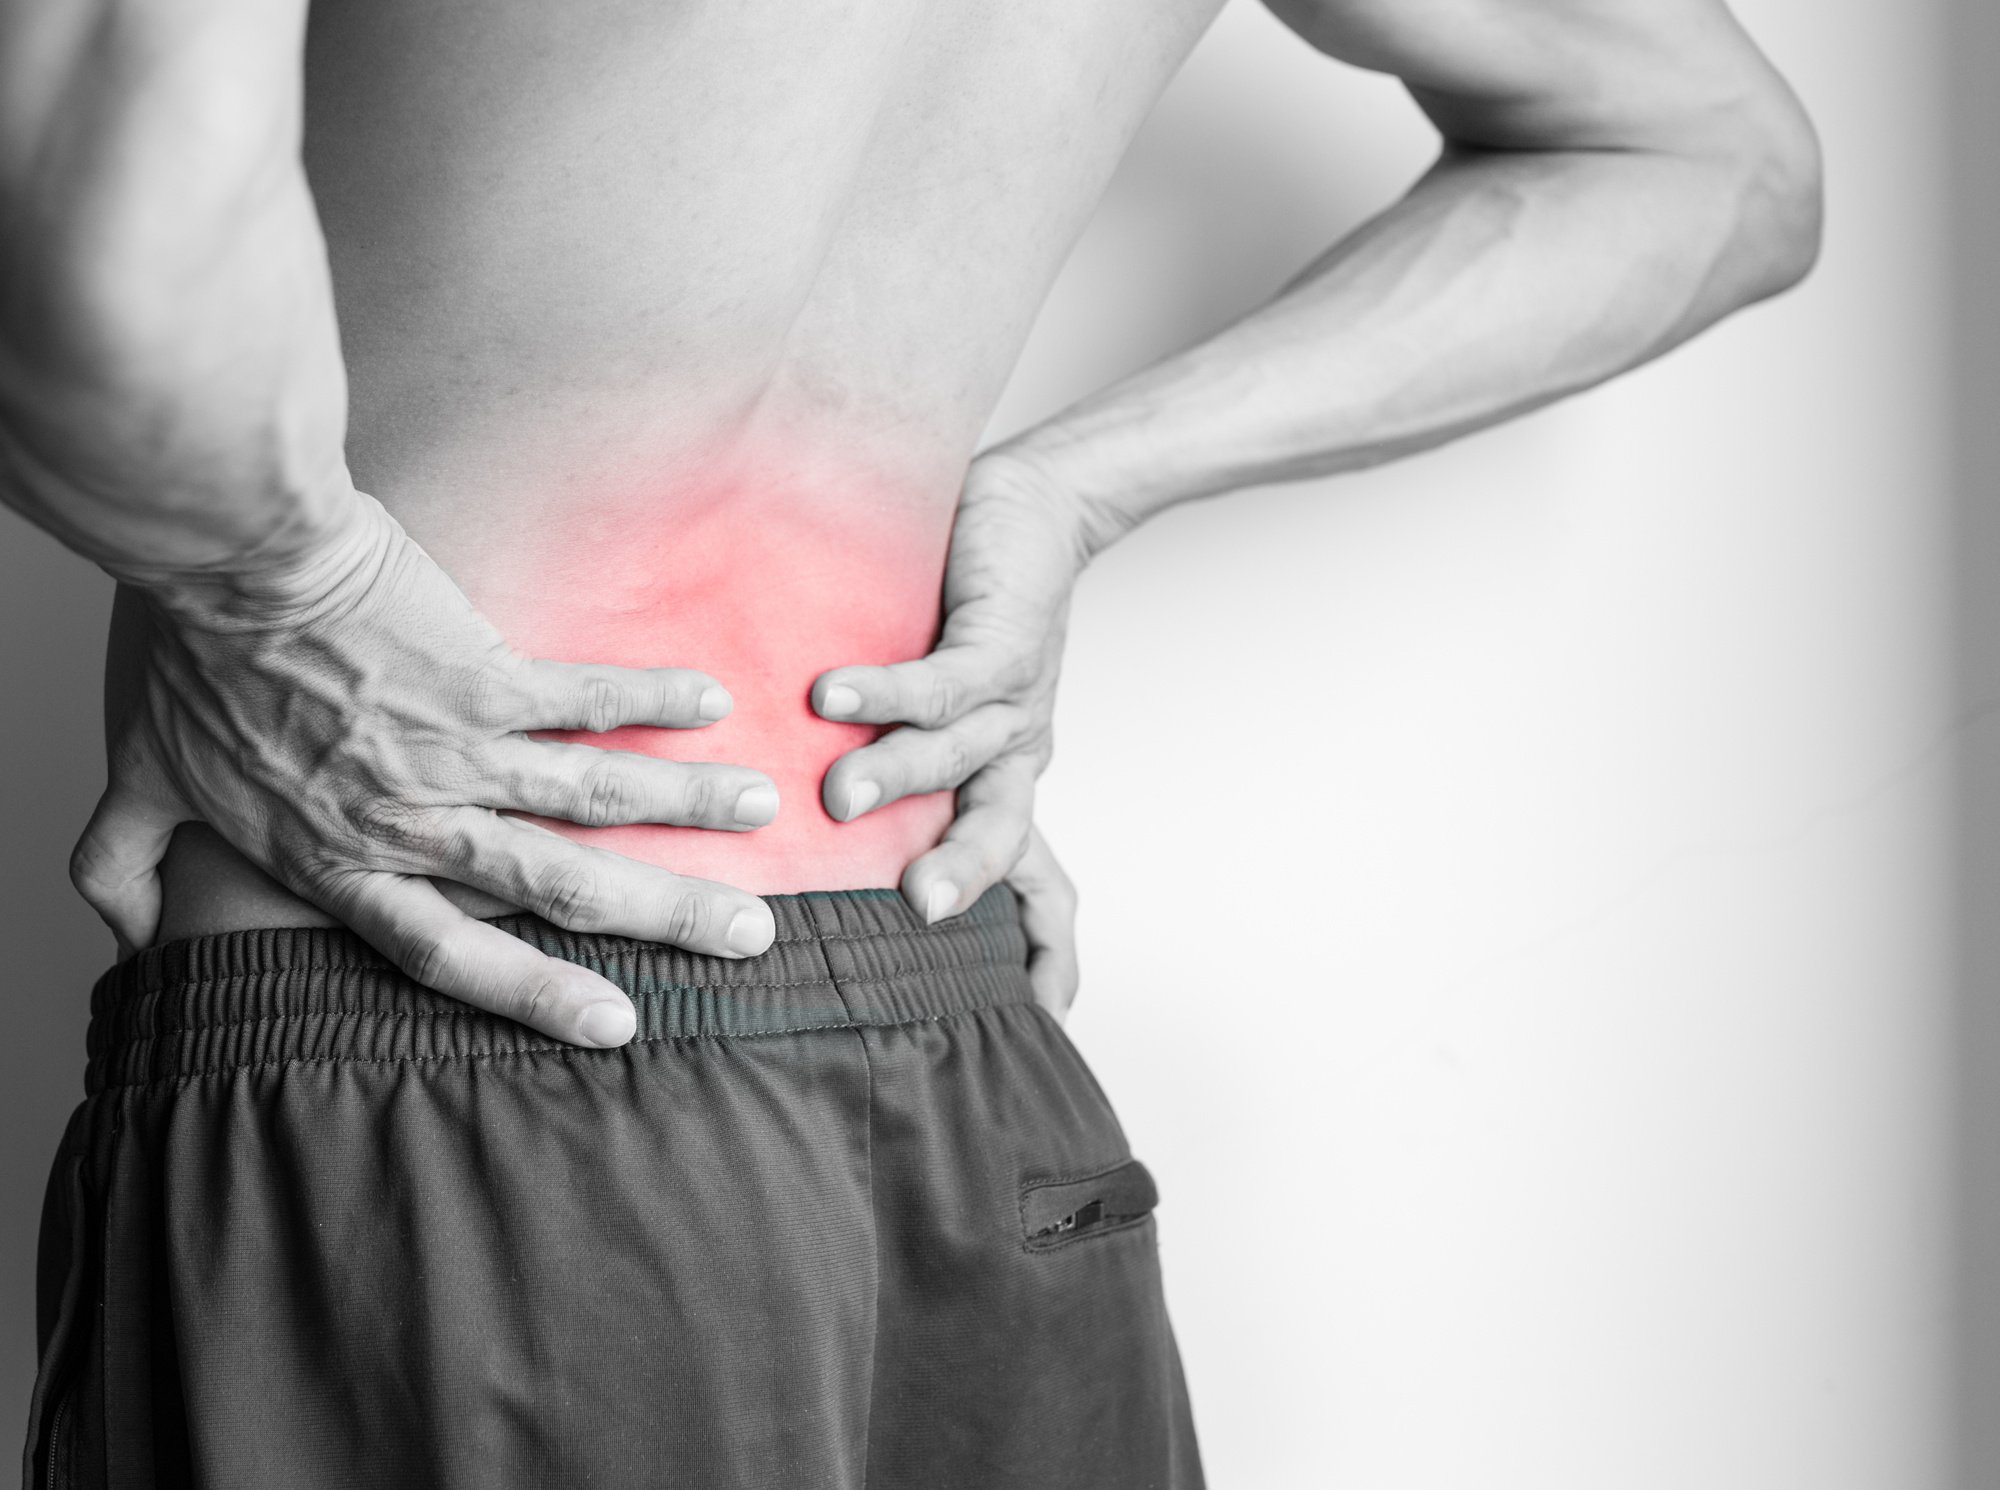 10 Tips For Lower Back Pain To Help You Feel Better Faster